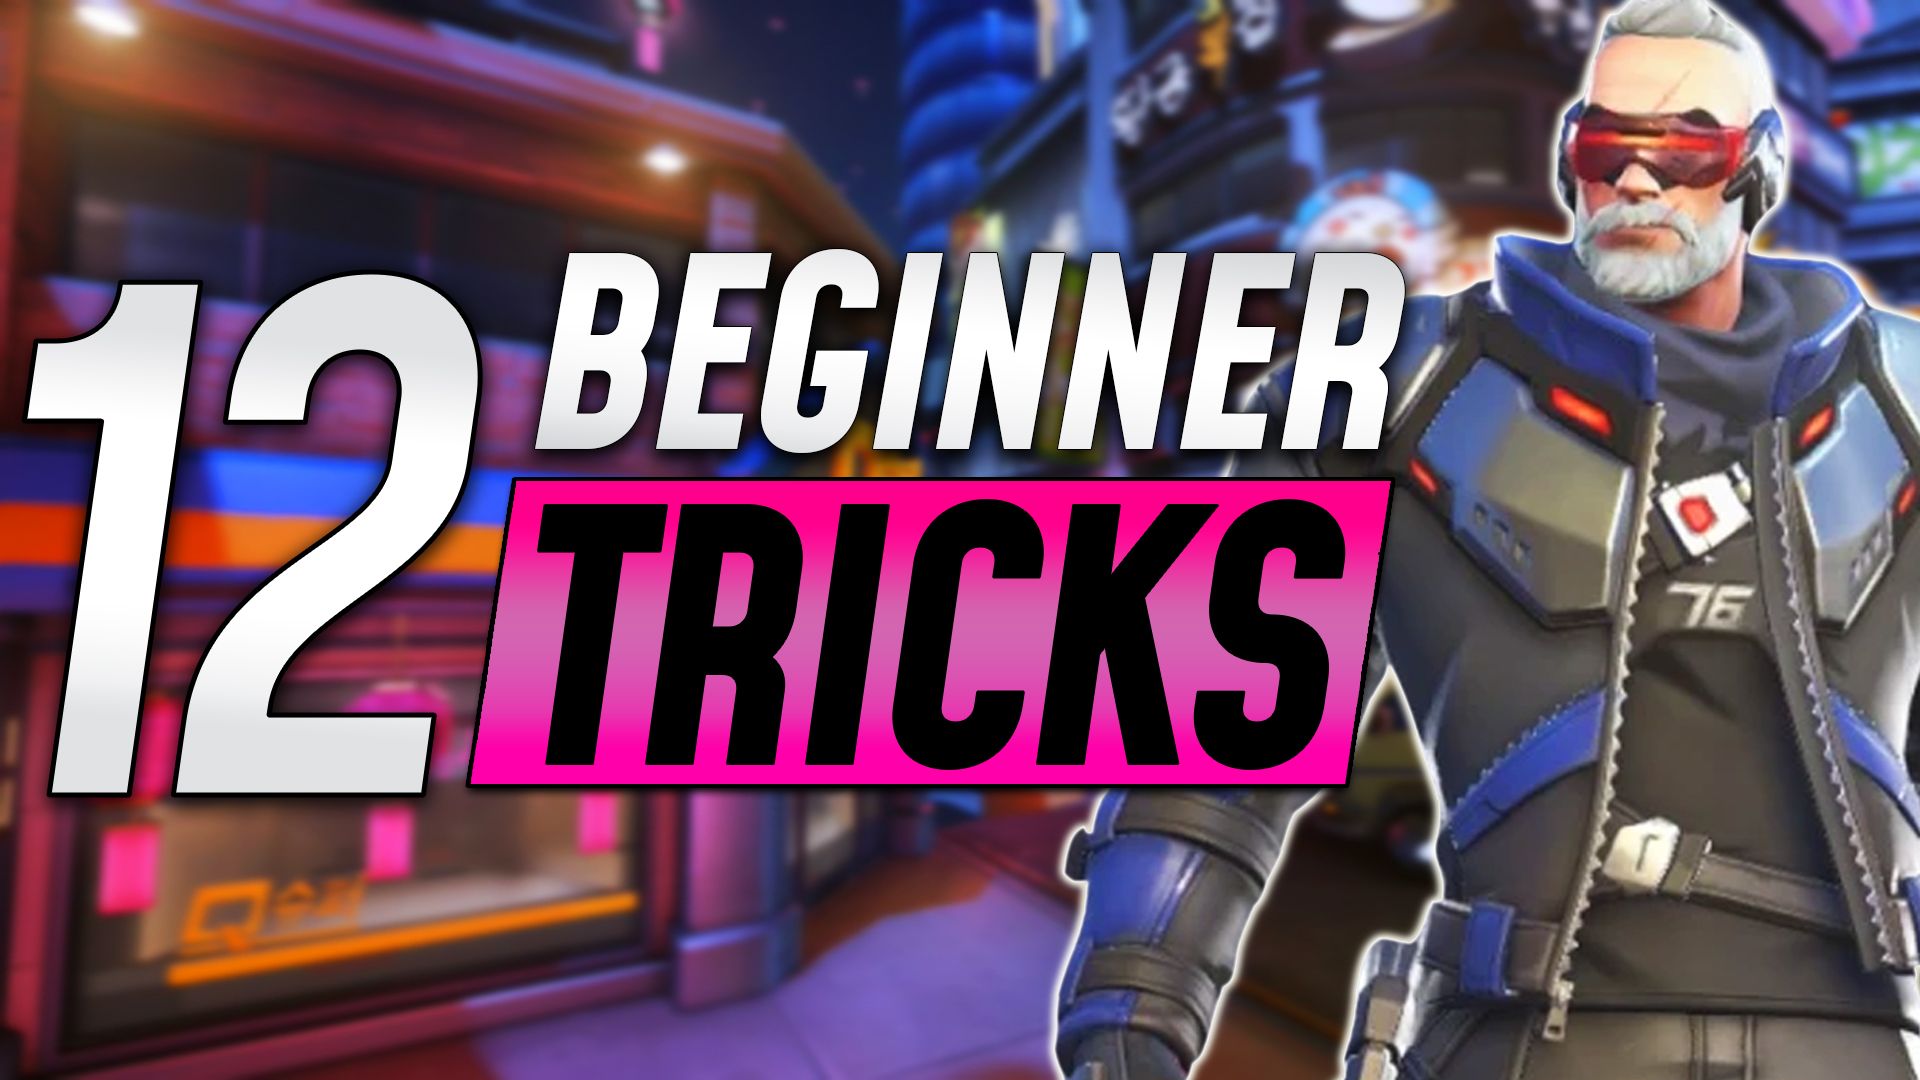 Overwatch 2: Soldier 76 Guide (Tips And Tricks)